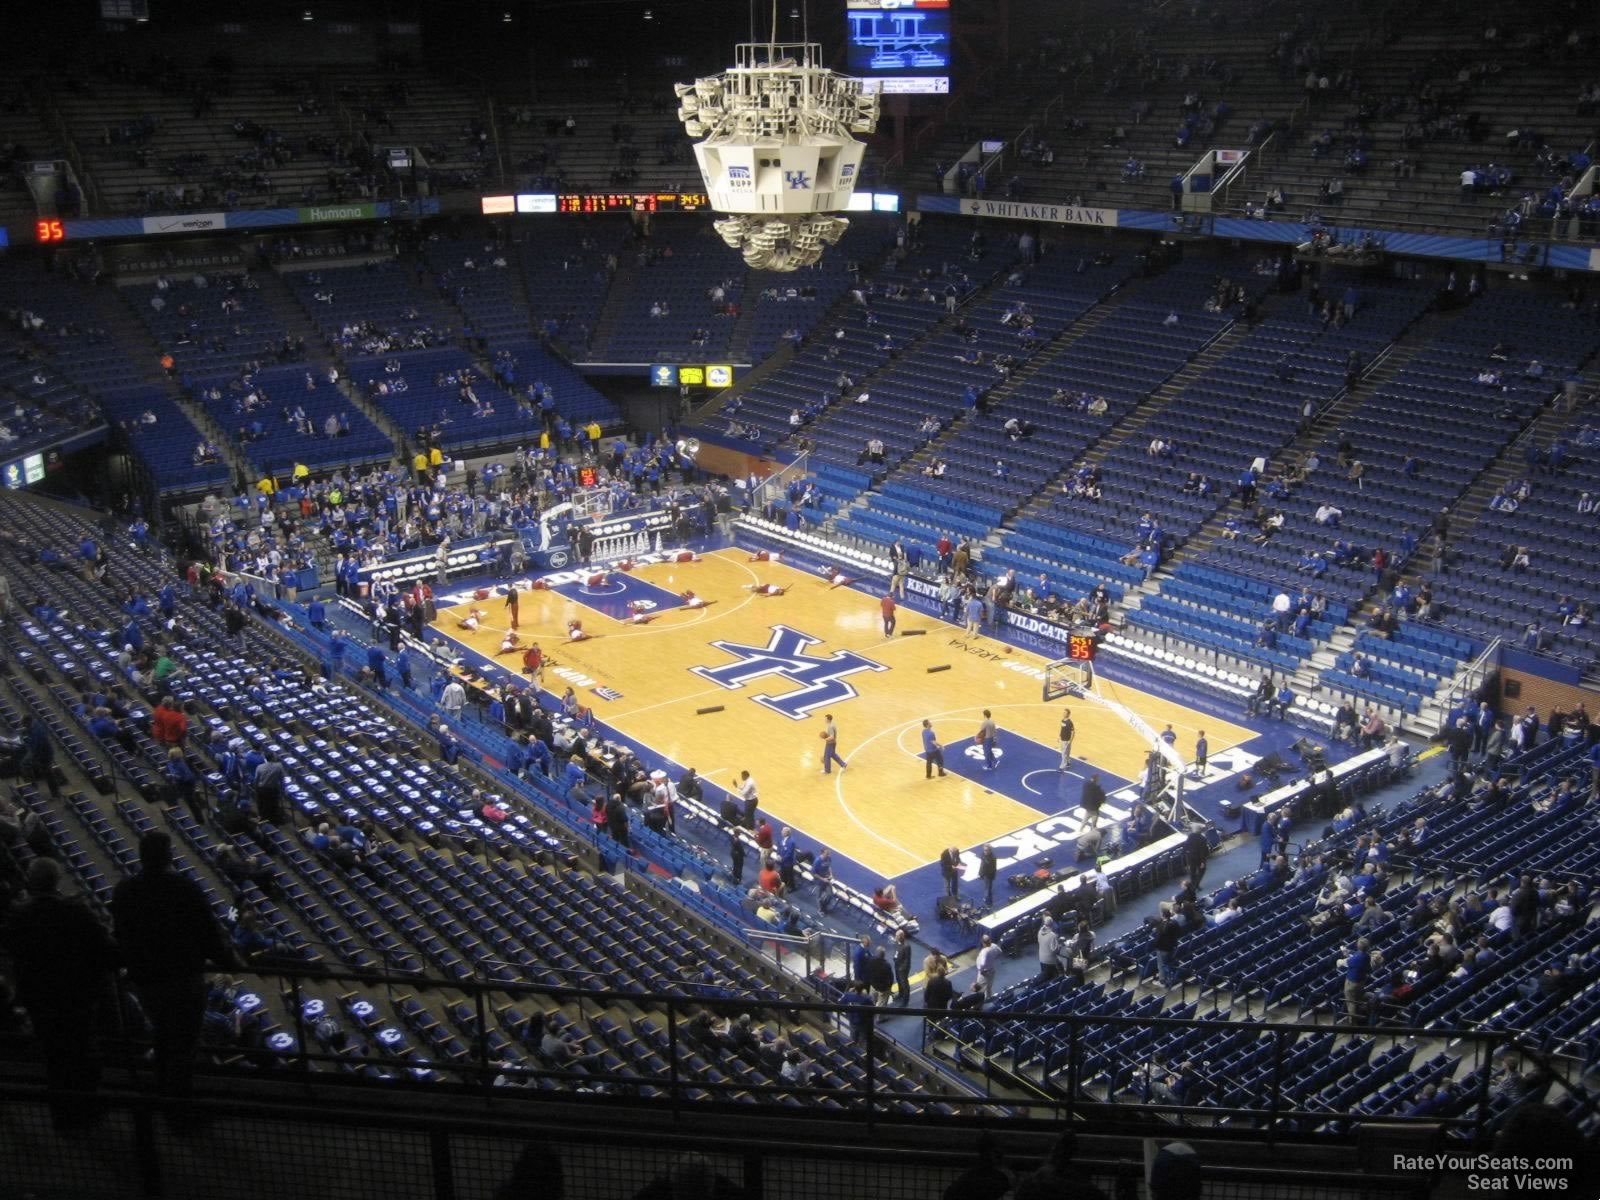 section 227, row n seat view  for basketball - rupp arena